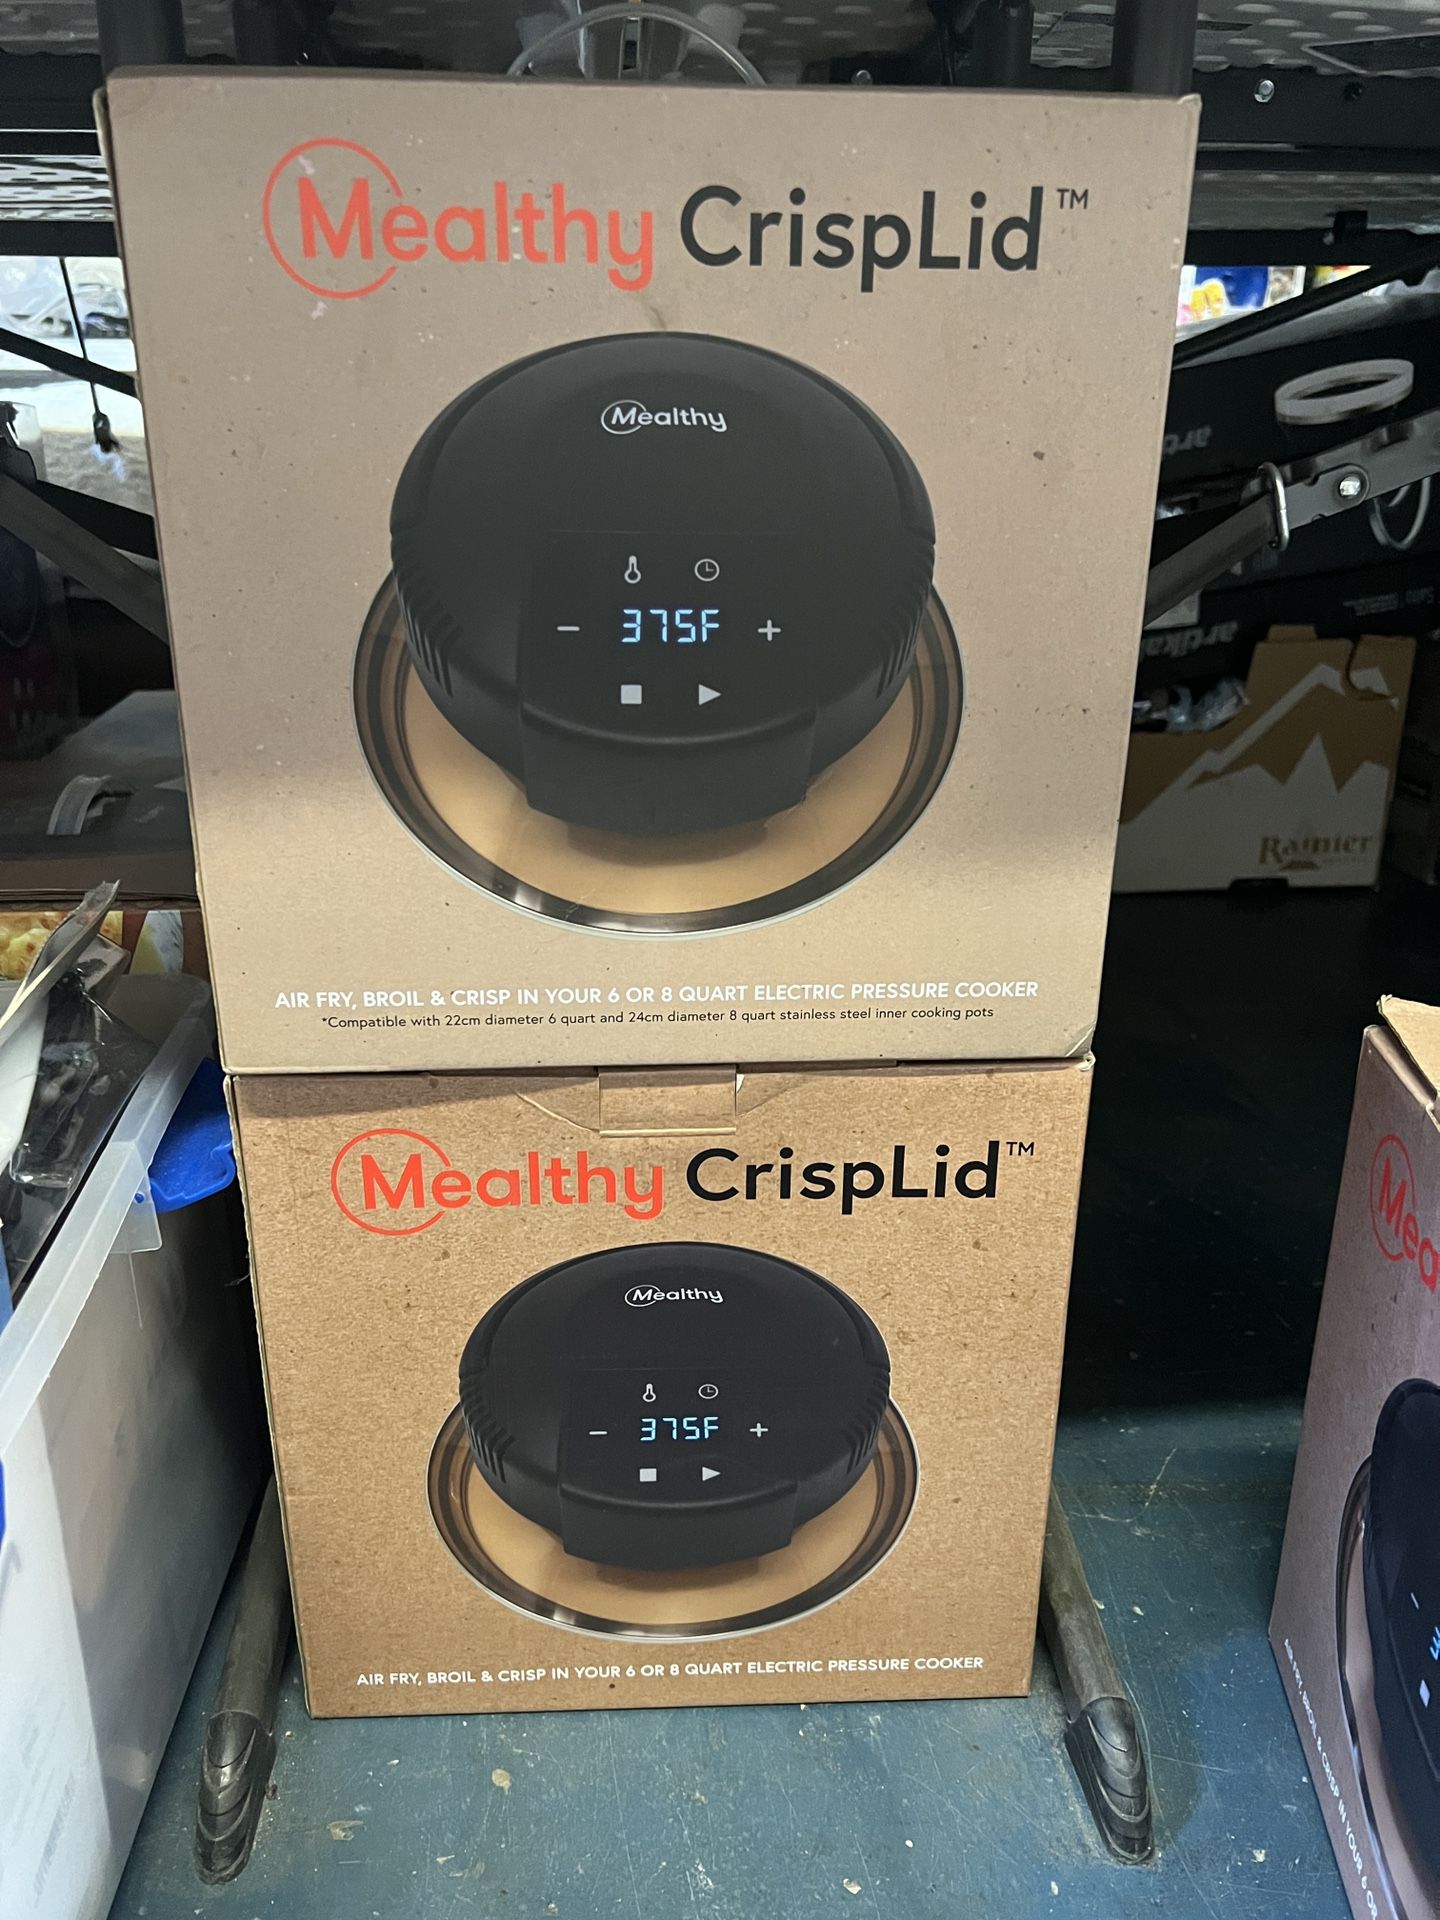 Mealthy CrispLid Turns Your Pressure Cooker into an Air Fryer!